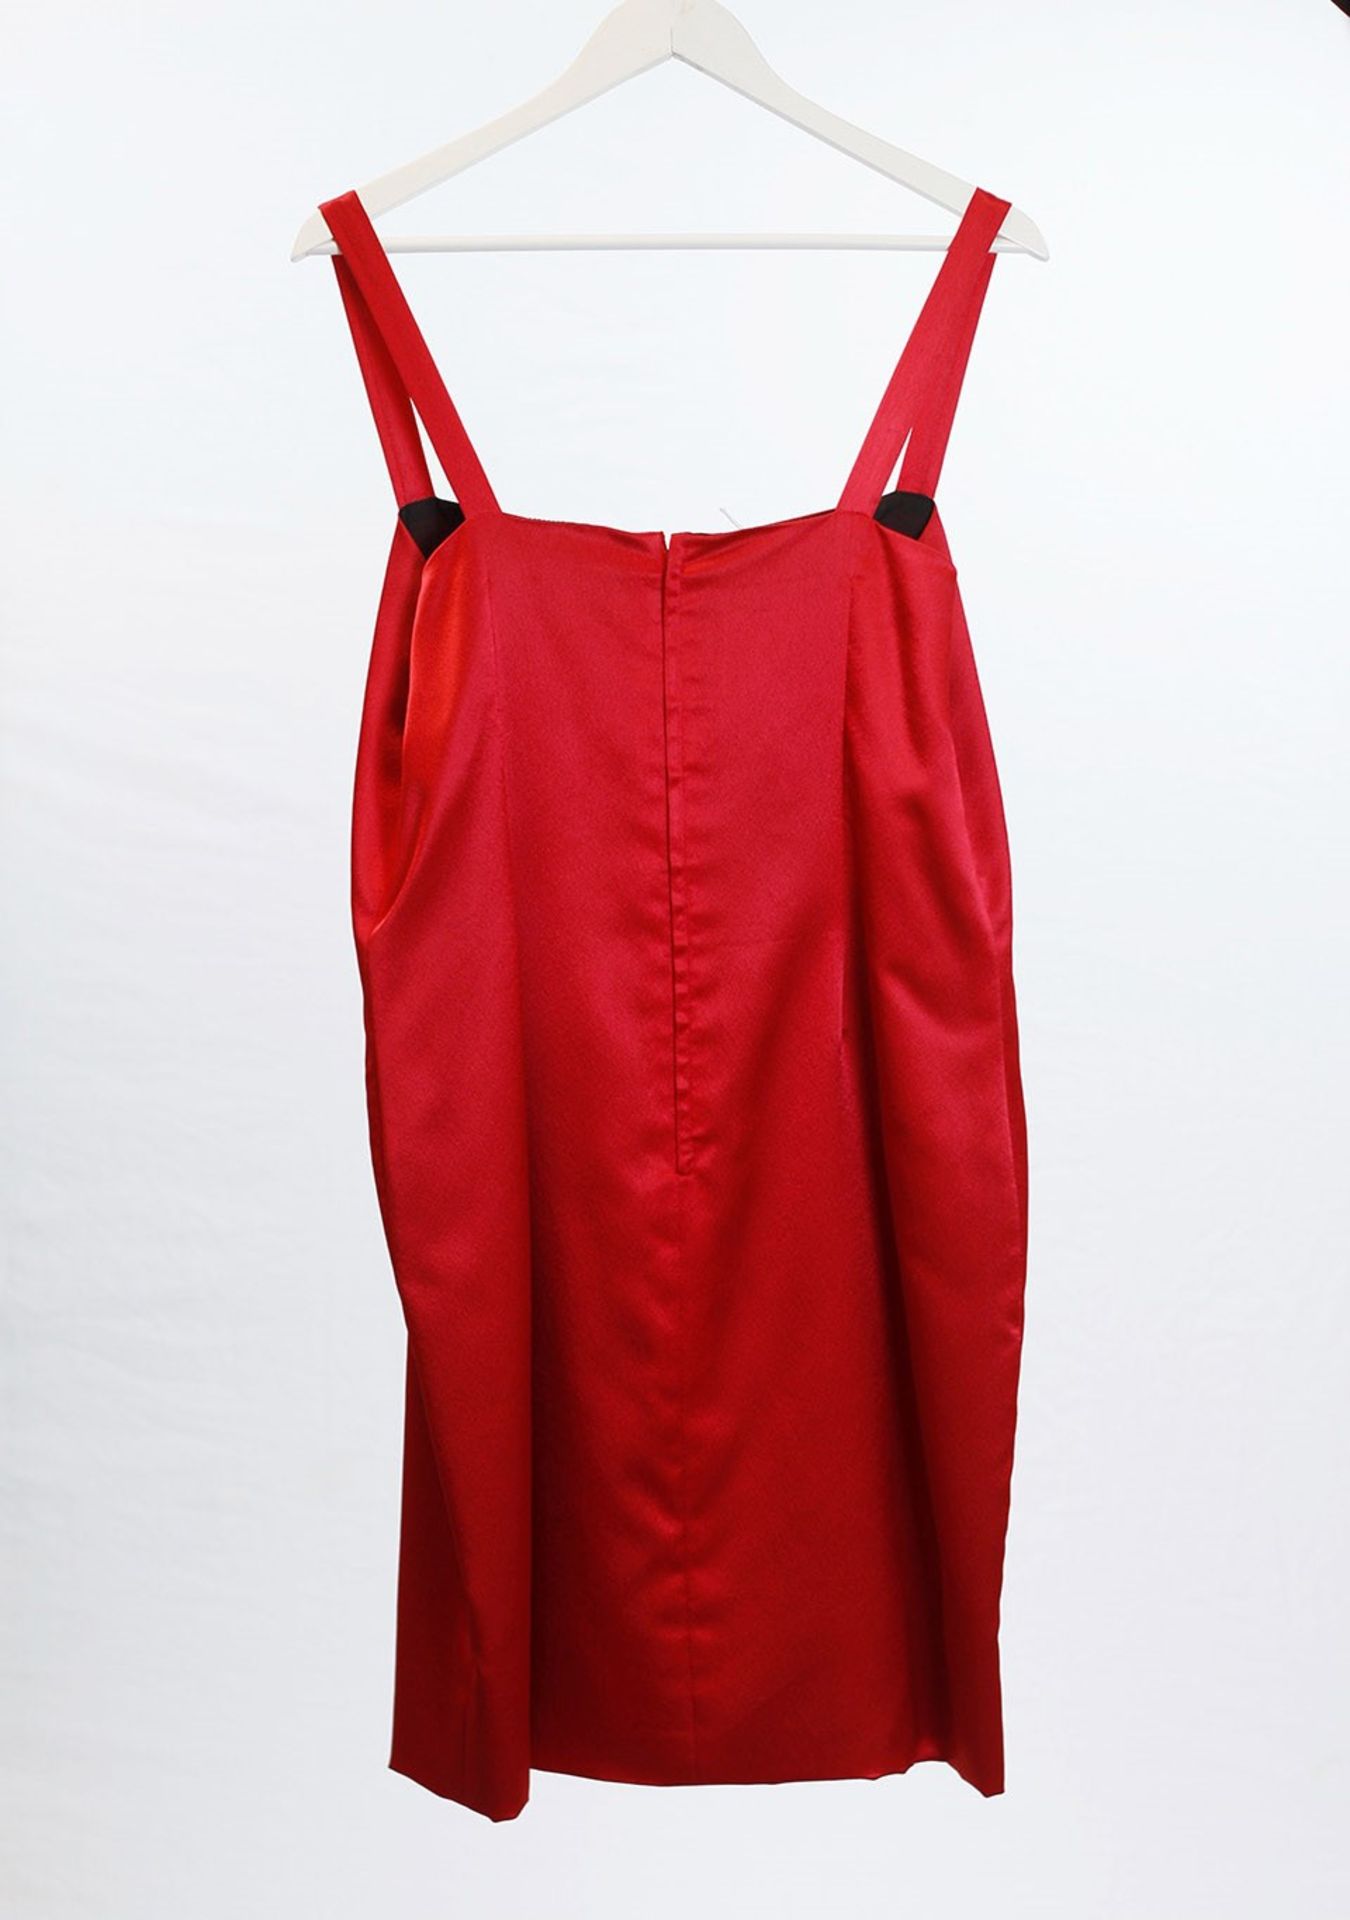 1 x Boutique Le Duc Red Dress - Size: 18 - Material: 55% Polyester, 45% Acetate - From a High End - Image 2 of 9